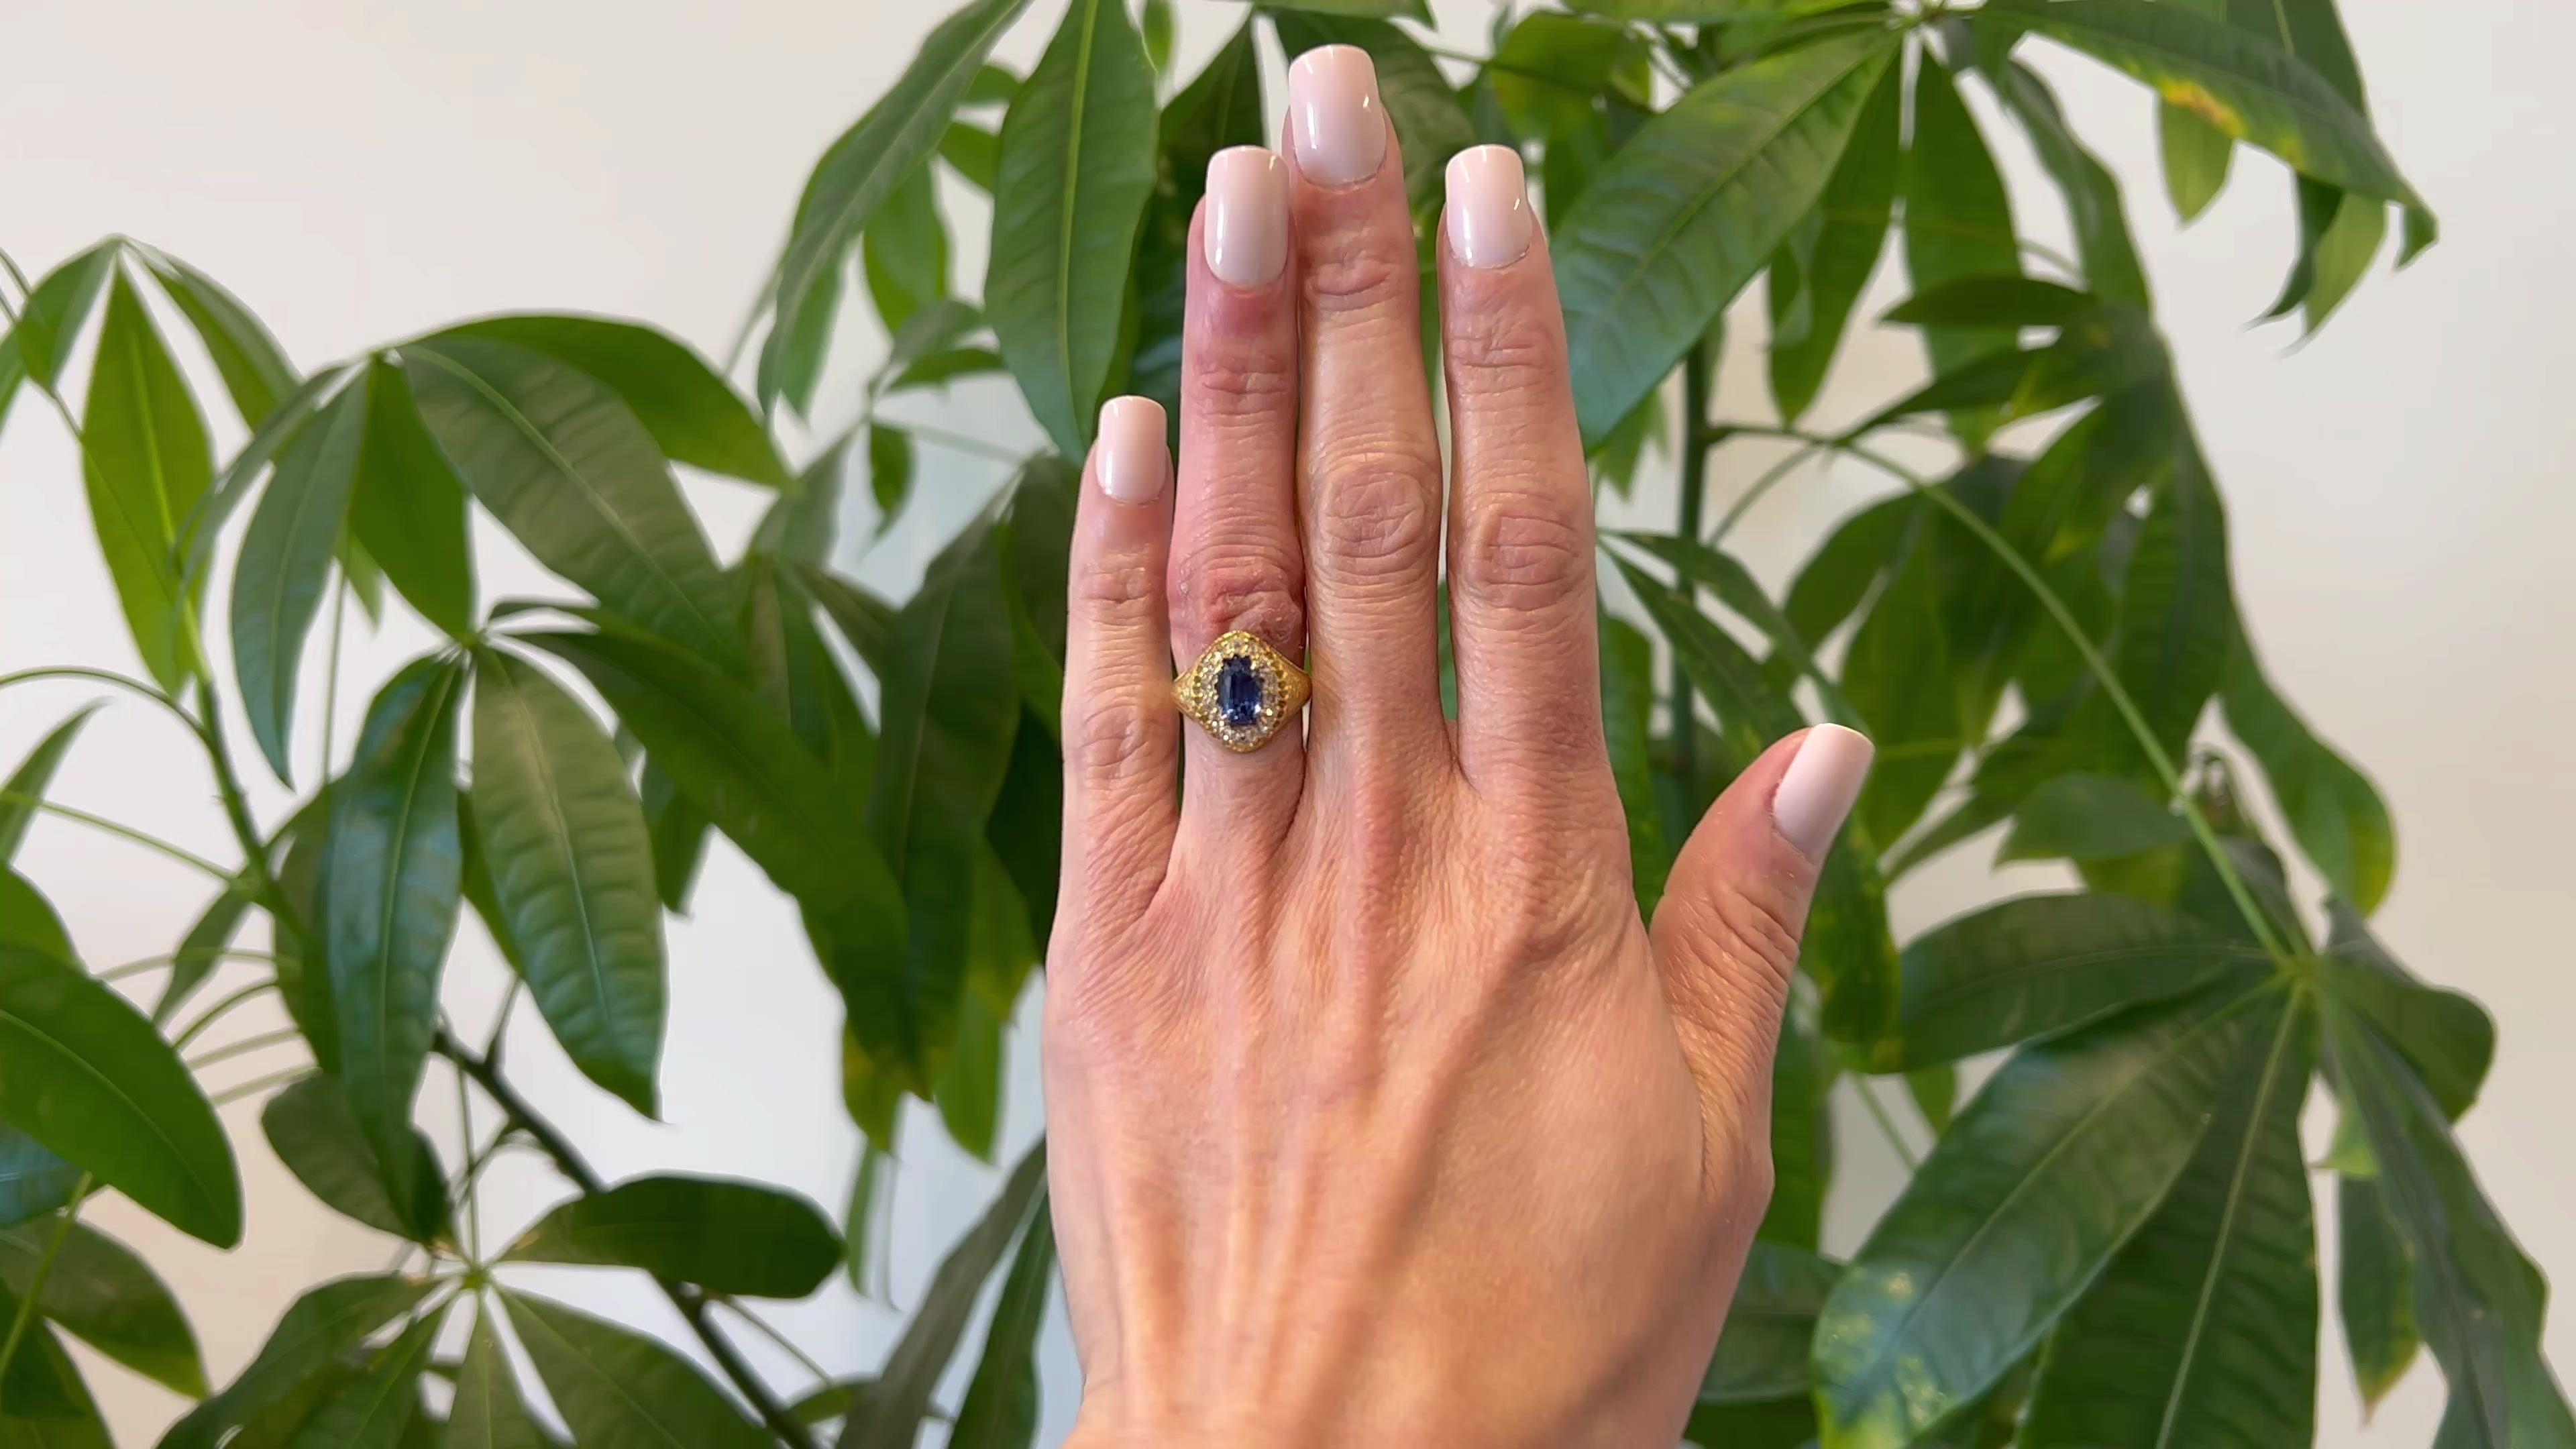 One Late Victorian GIA Ceylon Sapphire and Diamond 18k Yellow Gold Ring. Featuring one GIA cushion cut sapphire weighing approximately 2.00 carats, accompanied with GIA #5231064536 stating the sapphire is of Ceylon (Sri Lanka) origin. Accented by 14